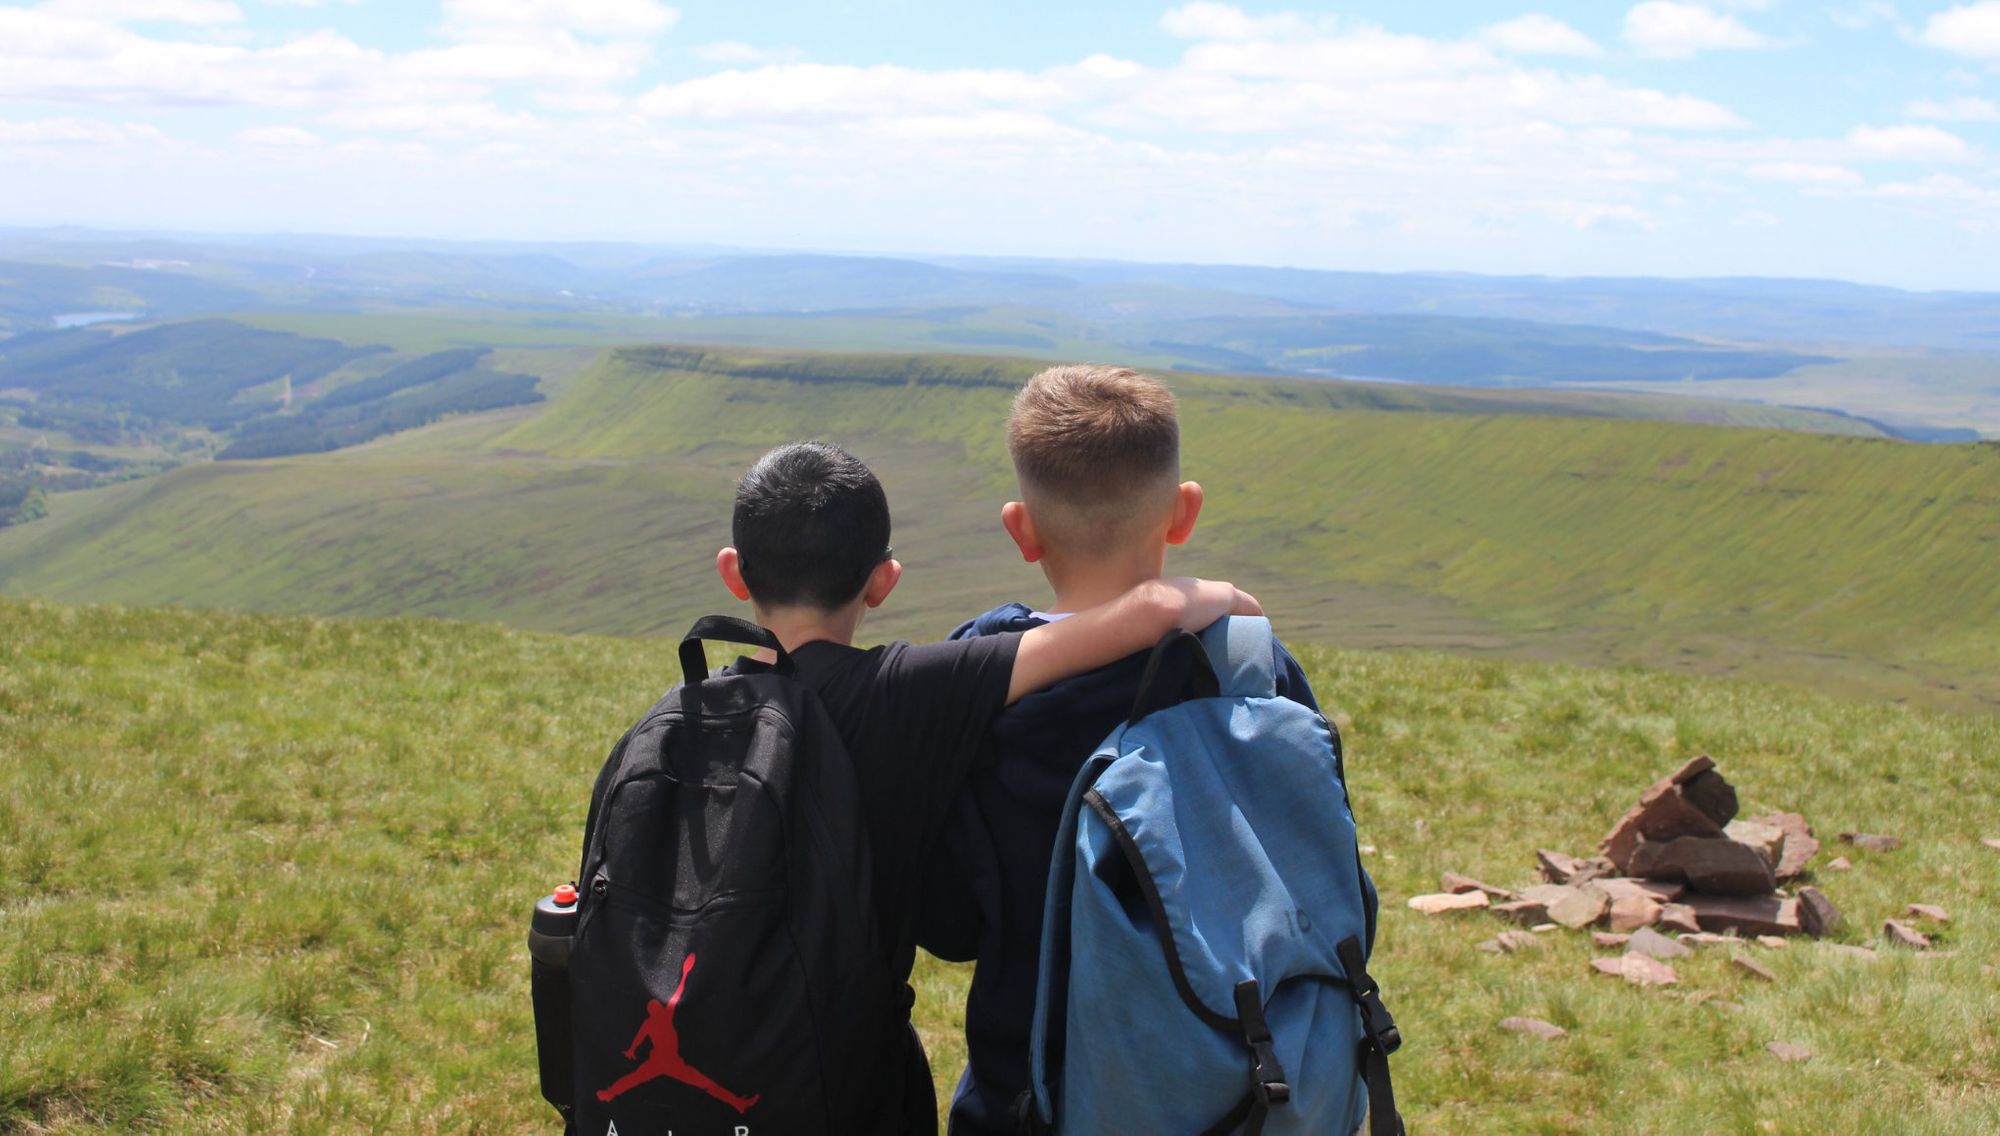 Two children in backpacks stand looking out over a moorland view, with their backs to the camera